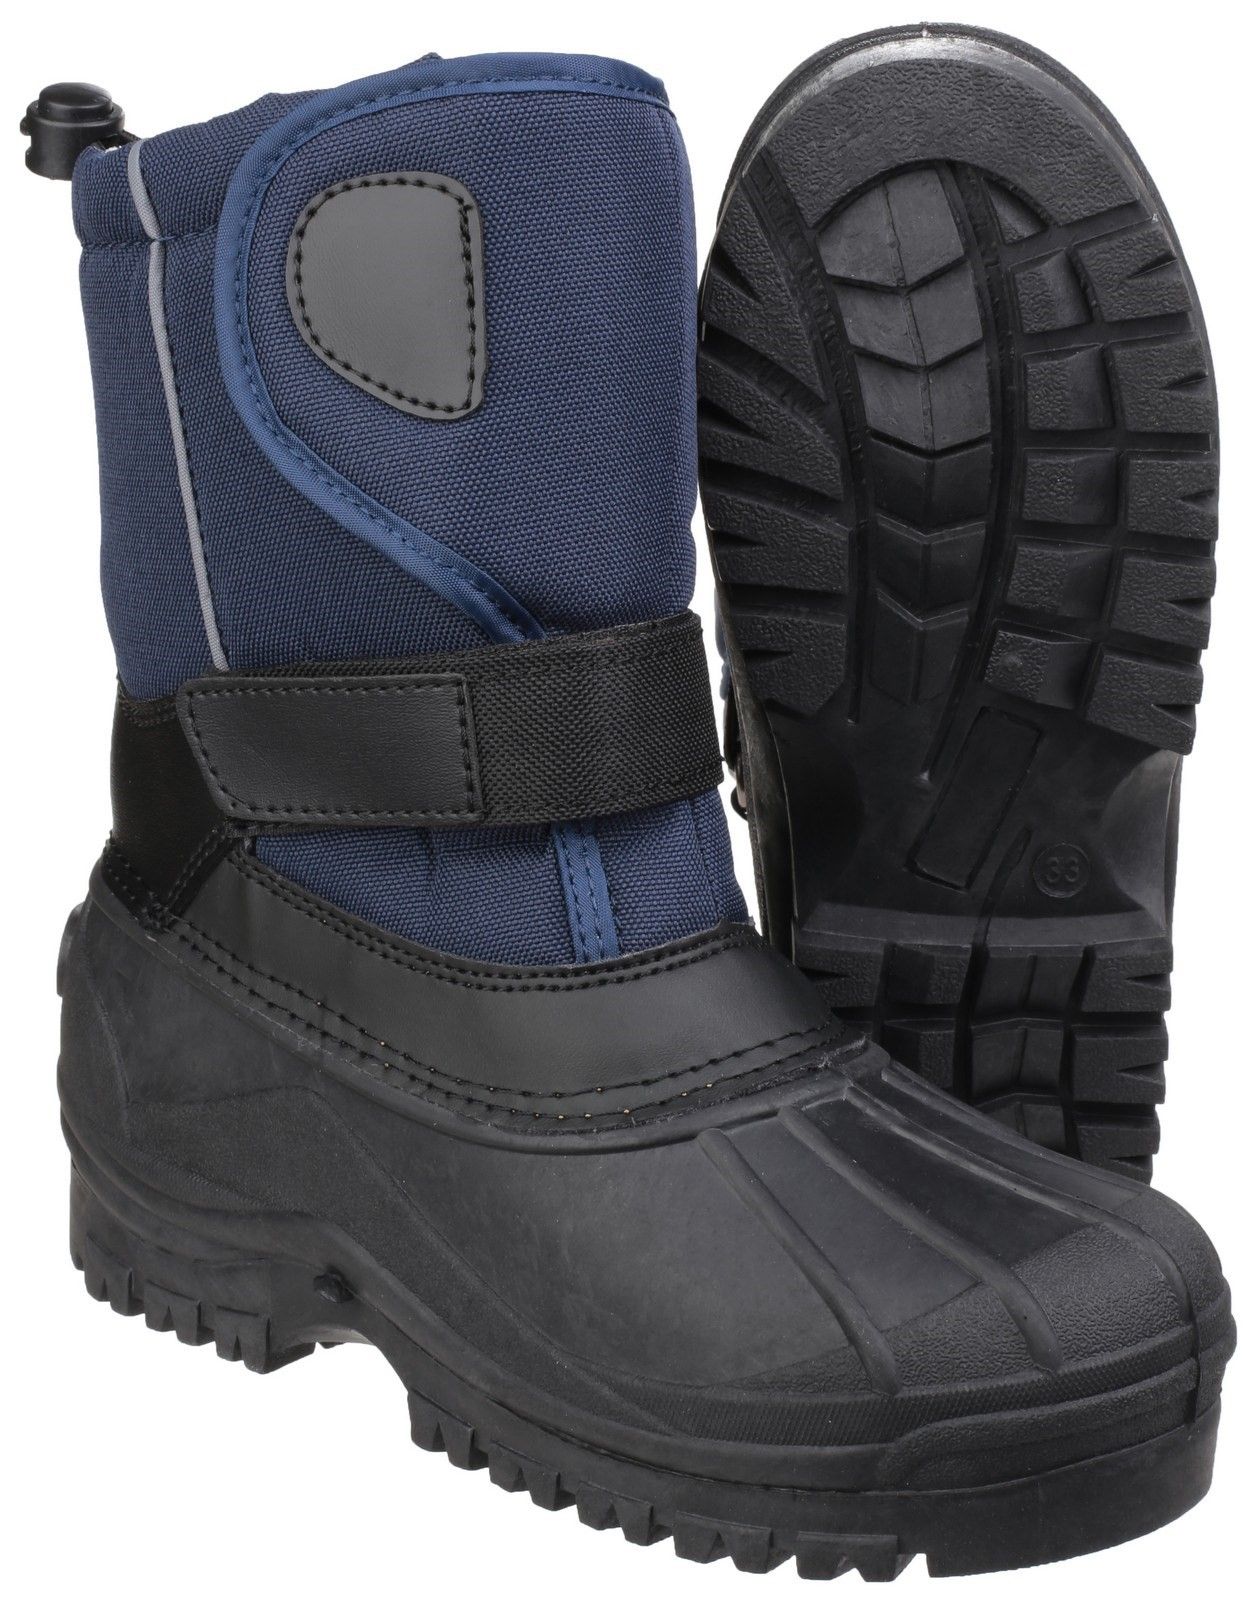 Our Children's water resistant calf length snowboot is the perfect boot to keep their feet warm and dry. They feature a quilted and padded upper, with a touch fastening strap to adjust the fit. It also has a thick tread sole which helps with tractionWarm inner fleece material. 
Touch fastening on upper. 
PU upper. 
TPR on outsole. 
Anti slip outsole.